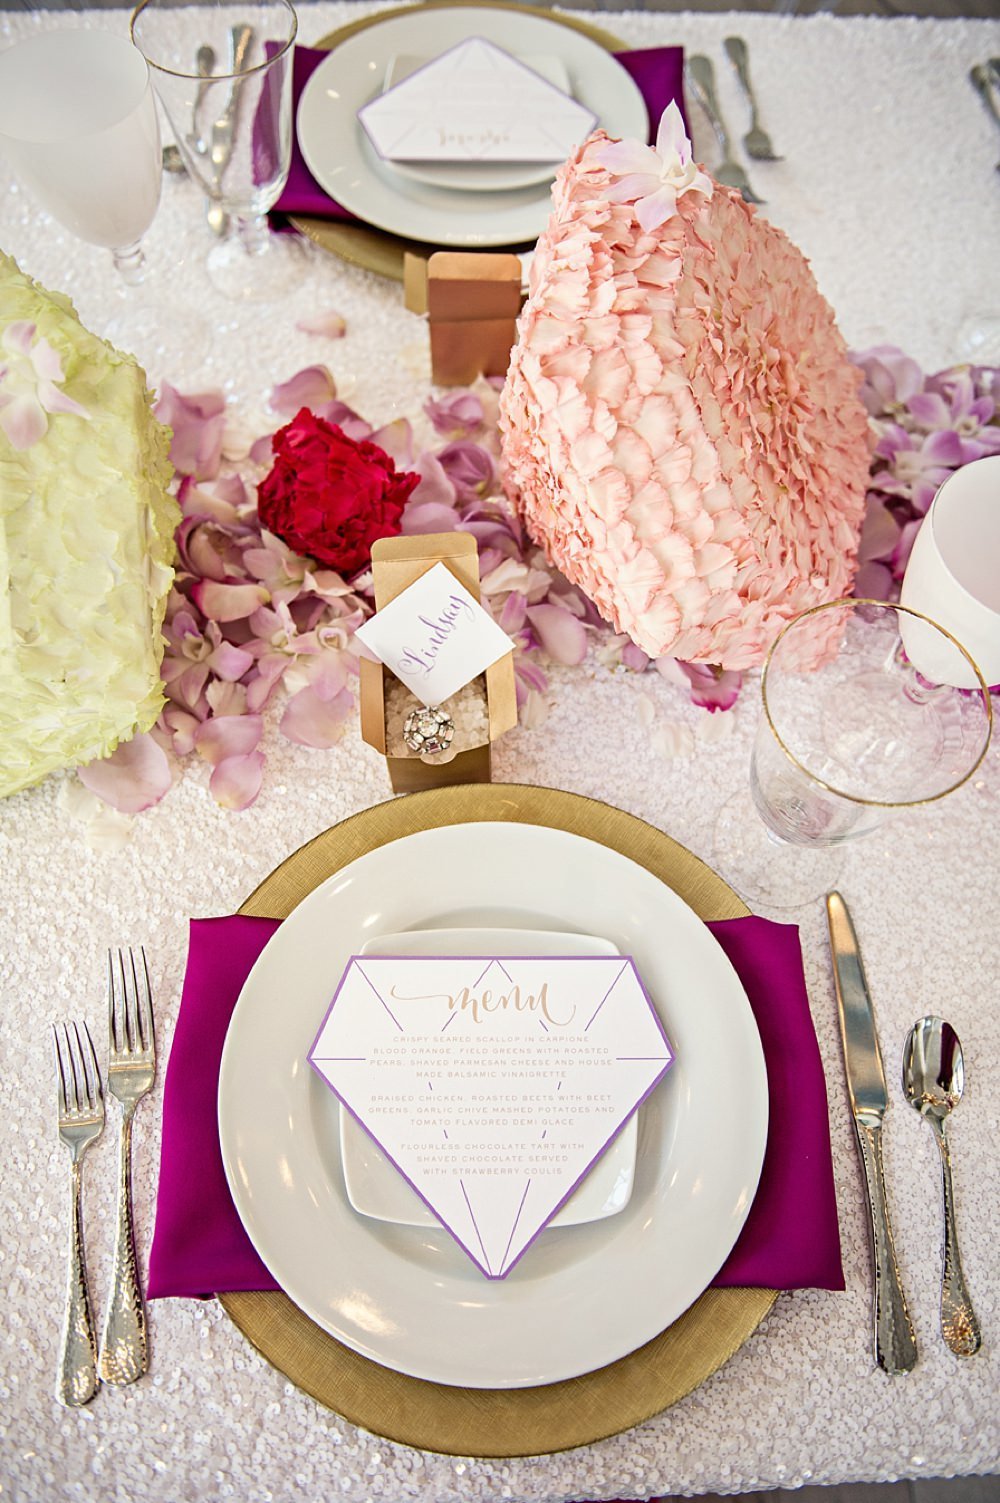 Gem inspired placesetting with menu card